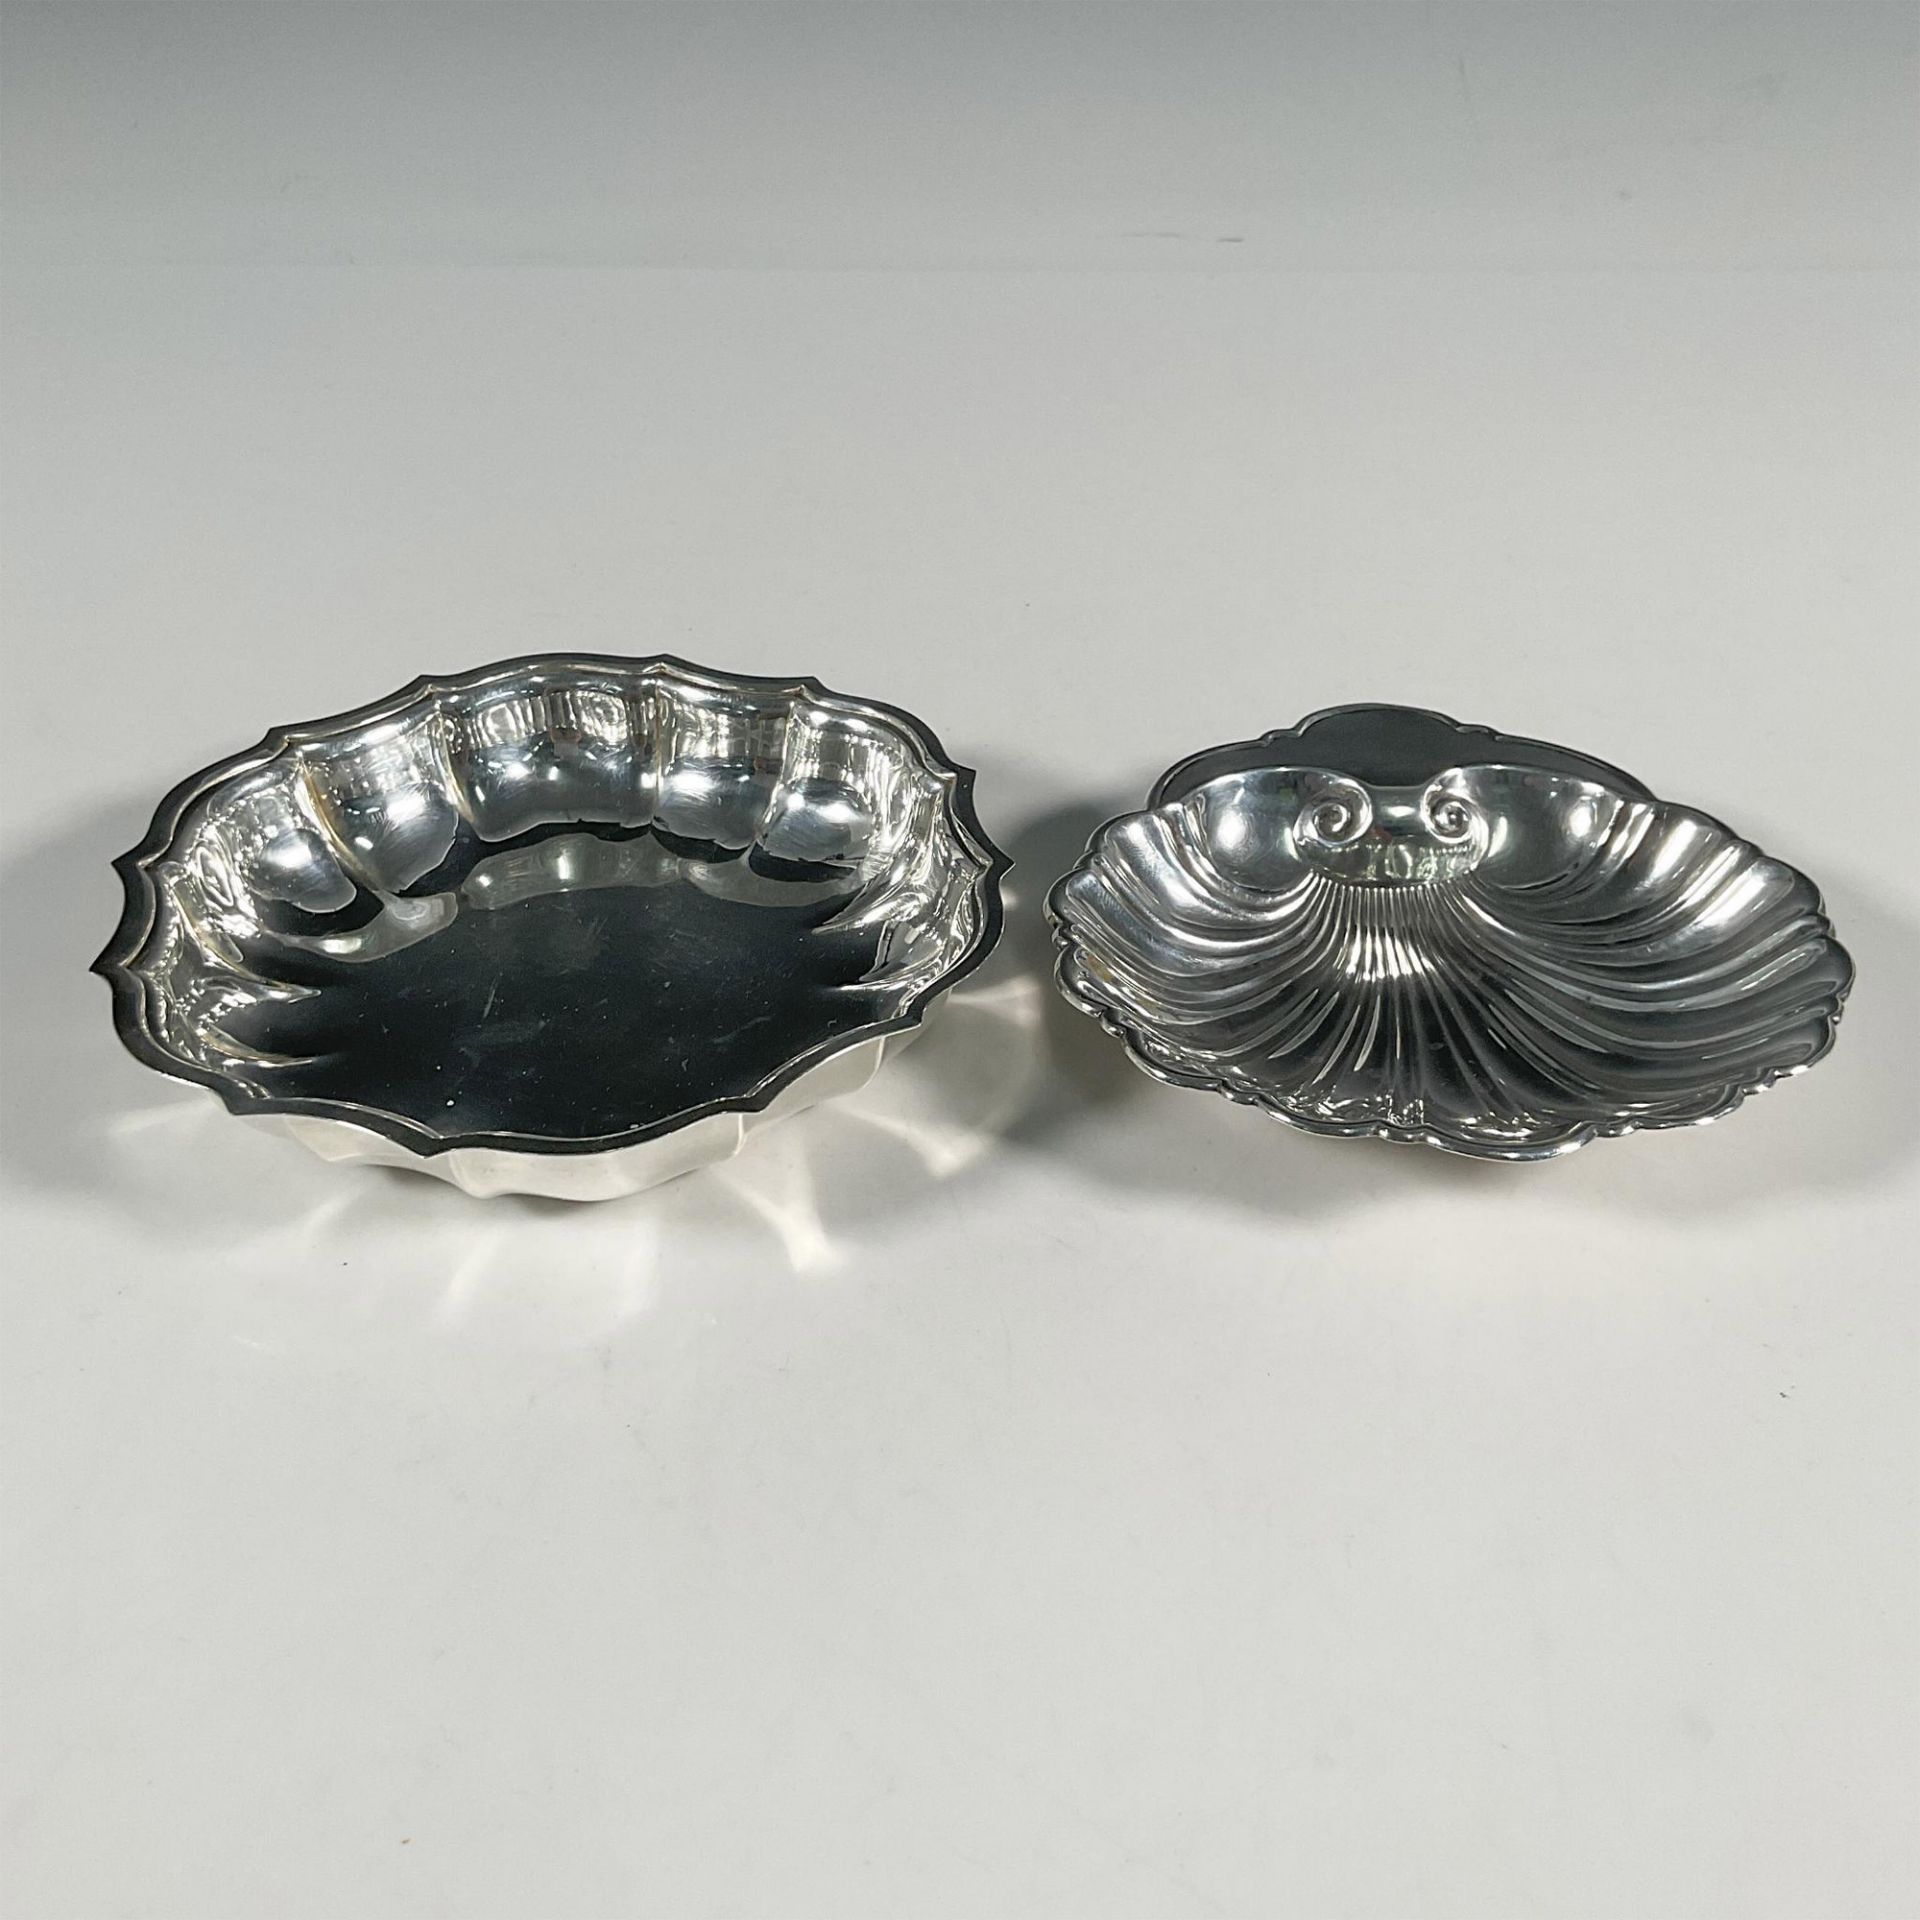 Gorham, and Chippendale Sterling Silver Bowls - Image 2 of 4